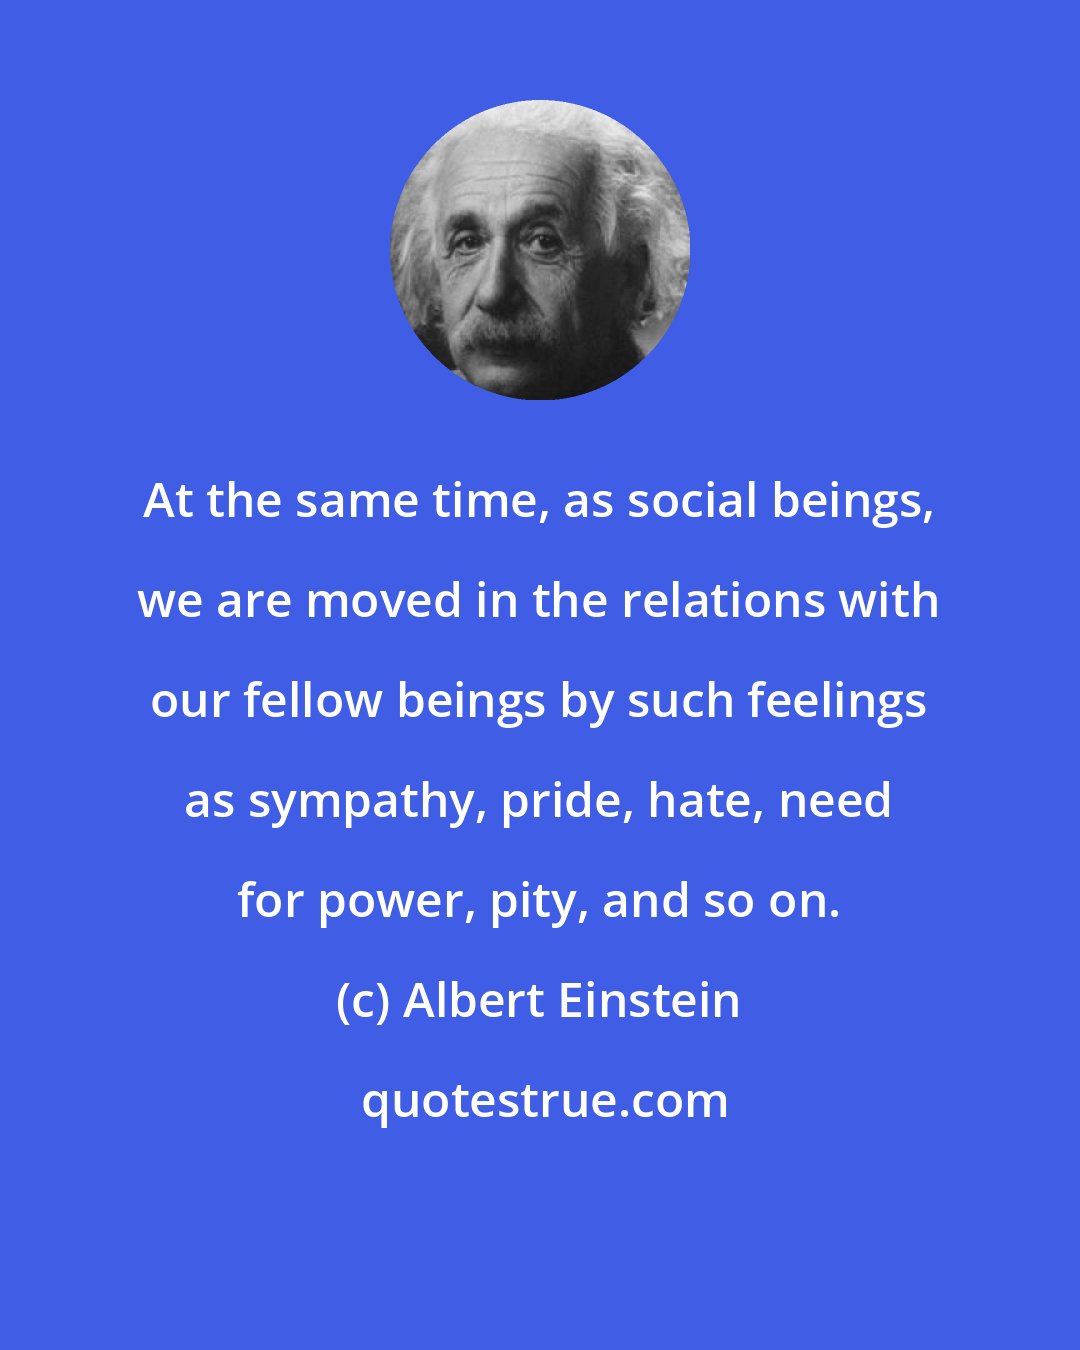 Albert Einstein: At the same time, as social beings, we are moved in the relations with our fellow beings by such feelings as sympathy, pride, hate, need for power, pity, and so on.